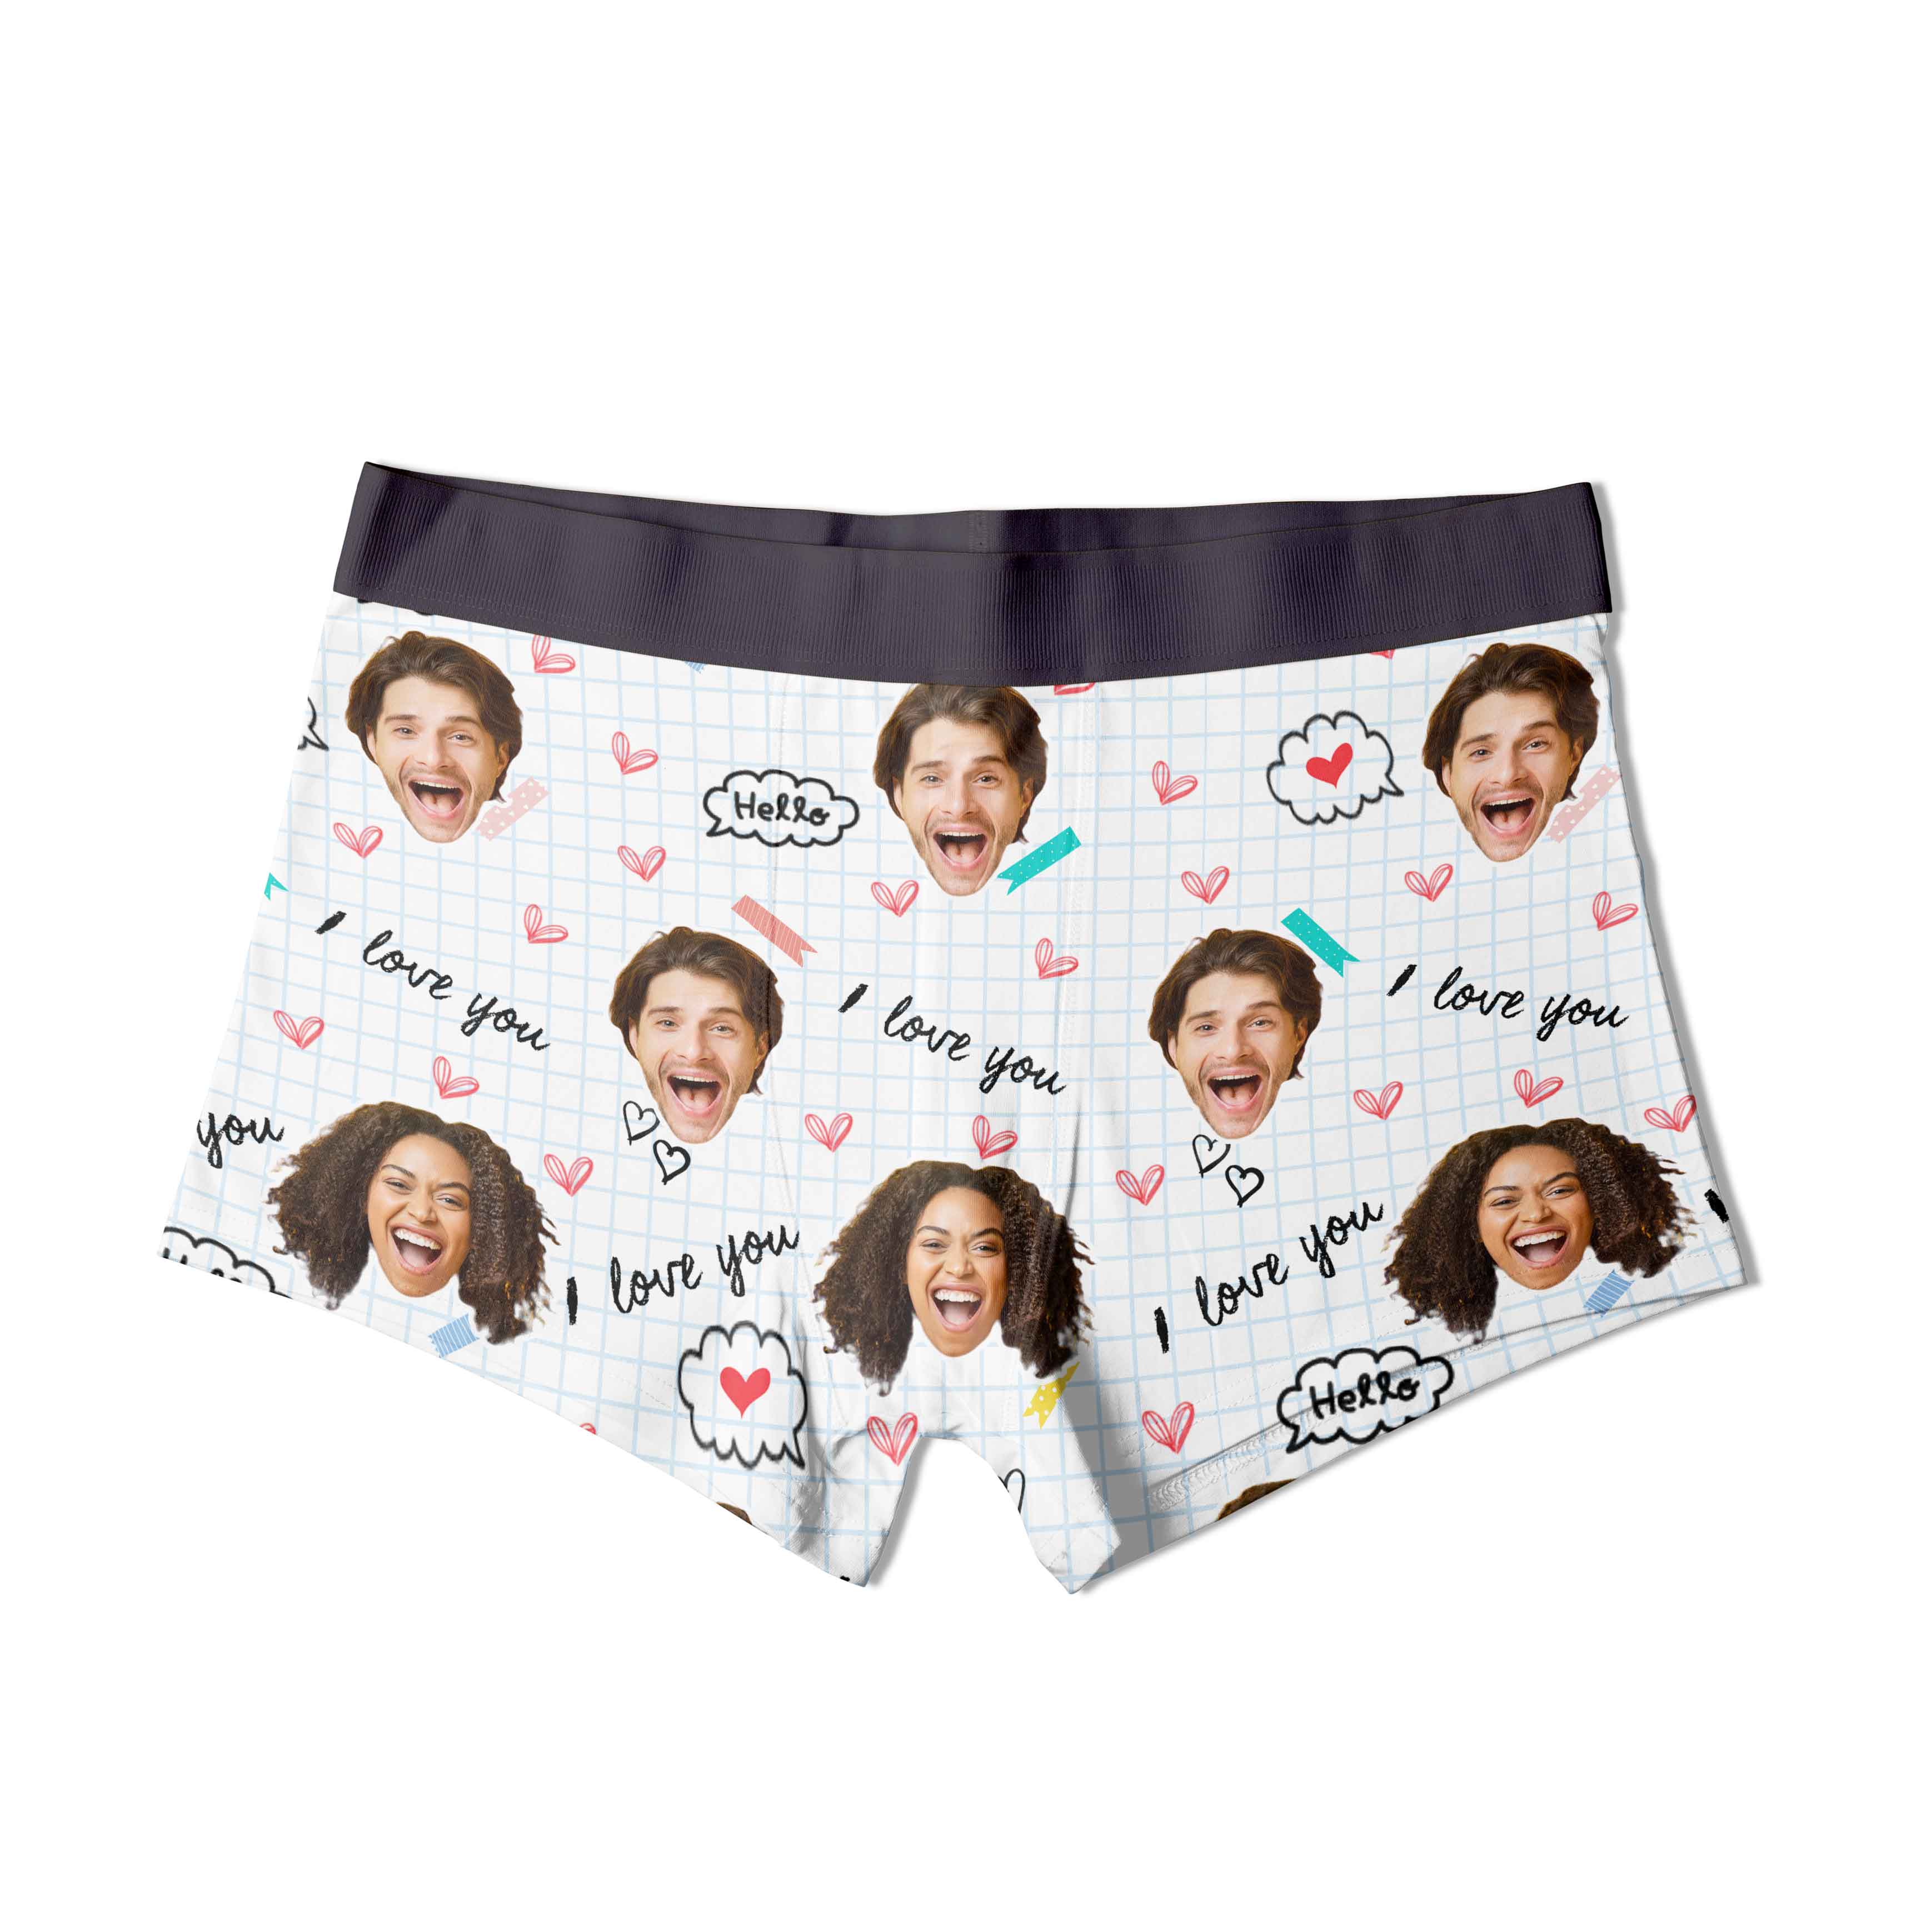 I Love You Personalised Personalised Boxers